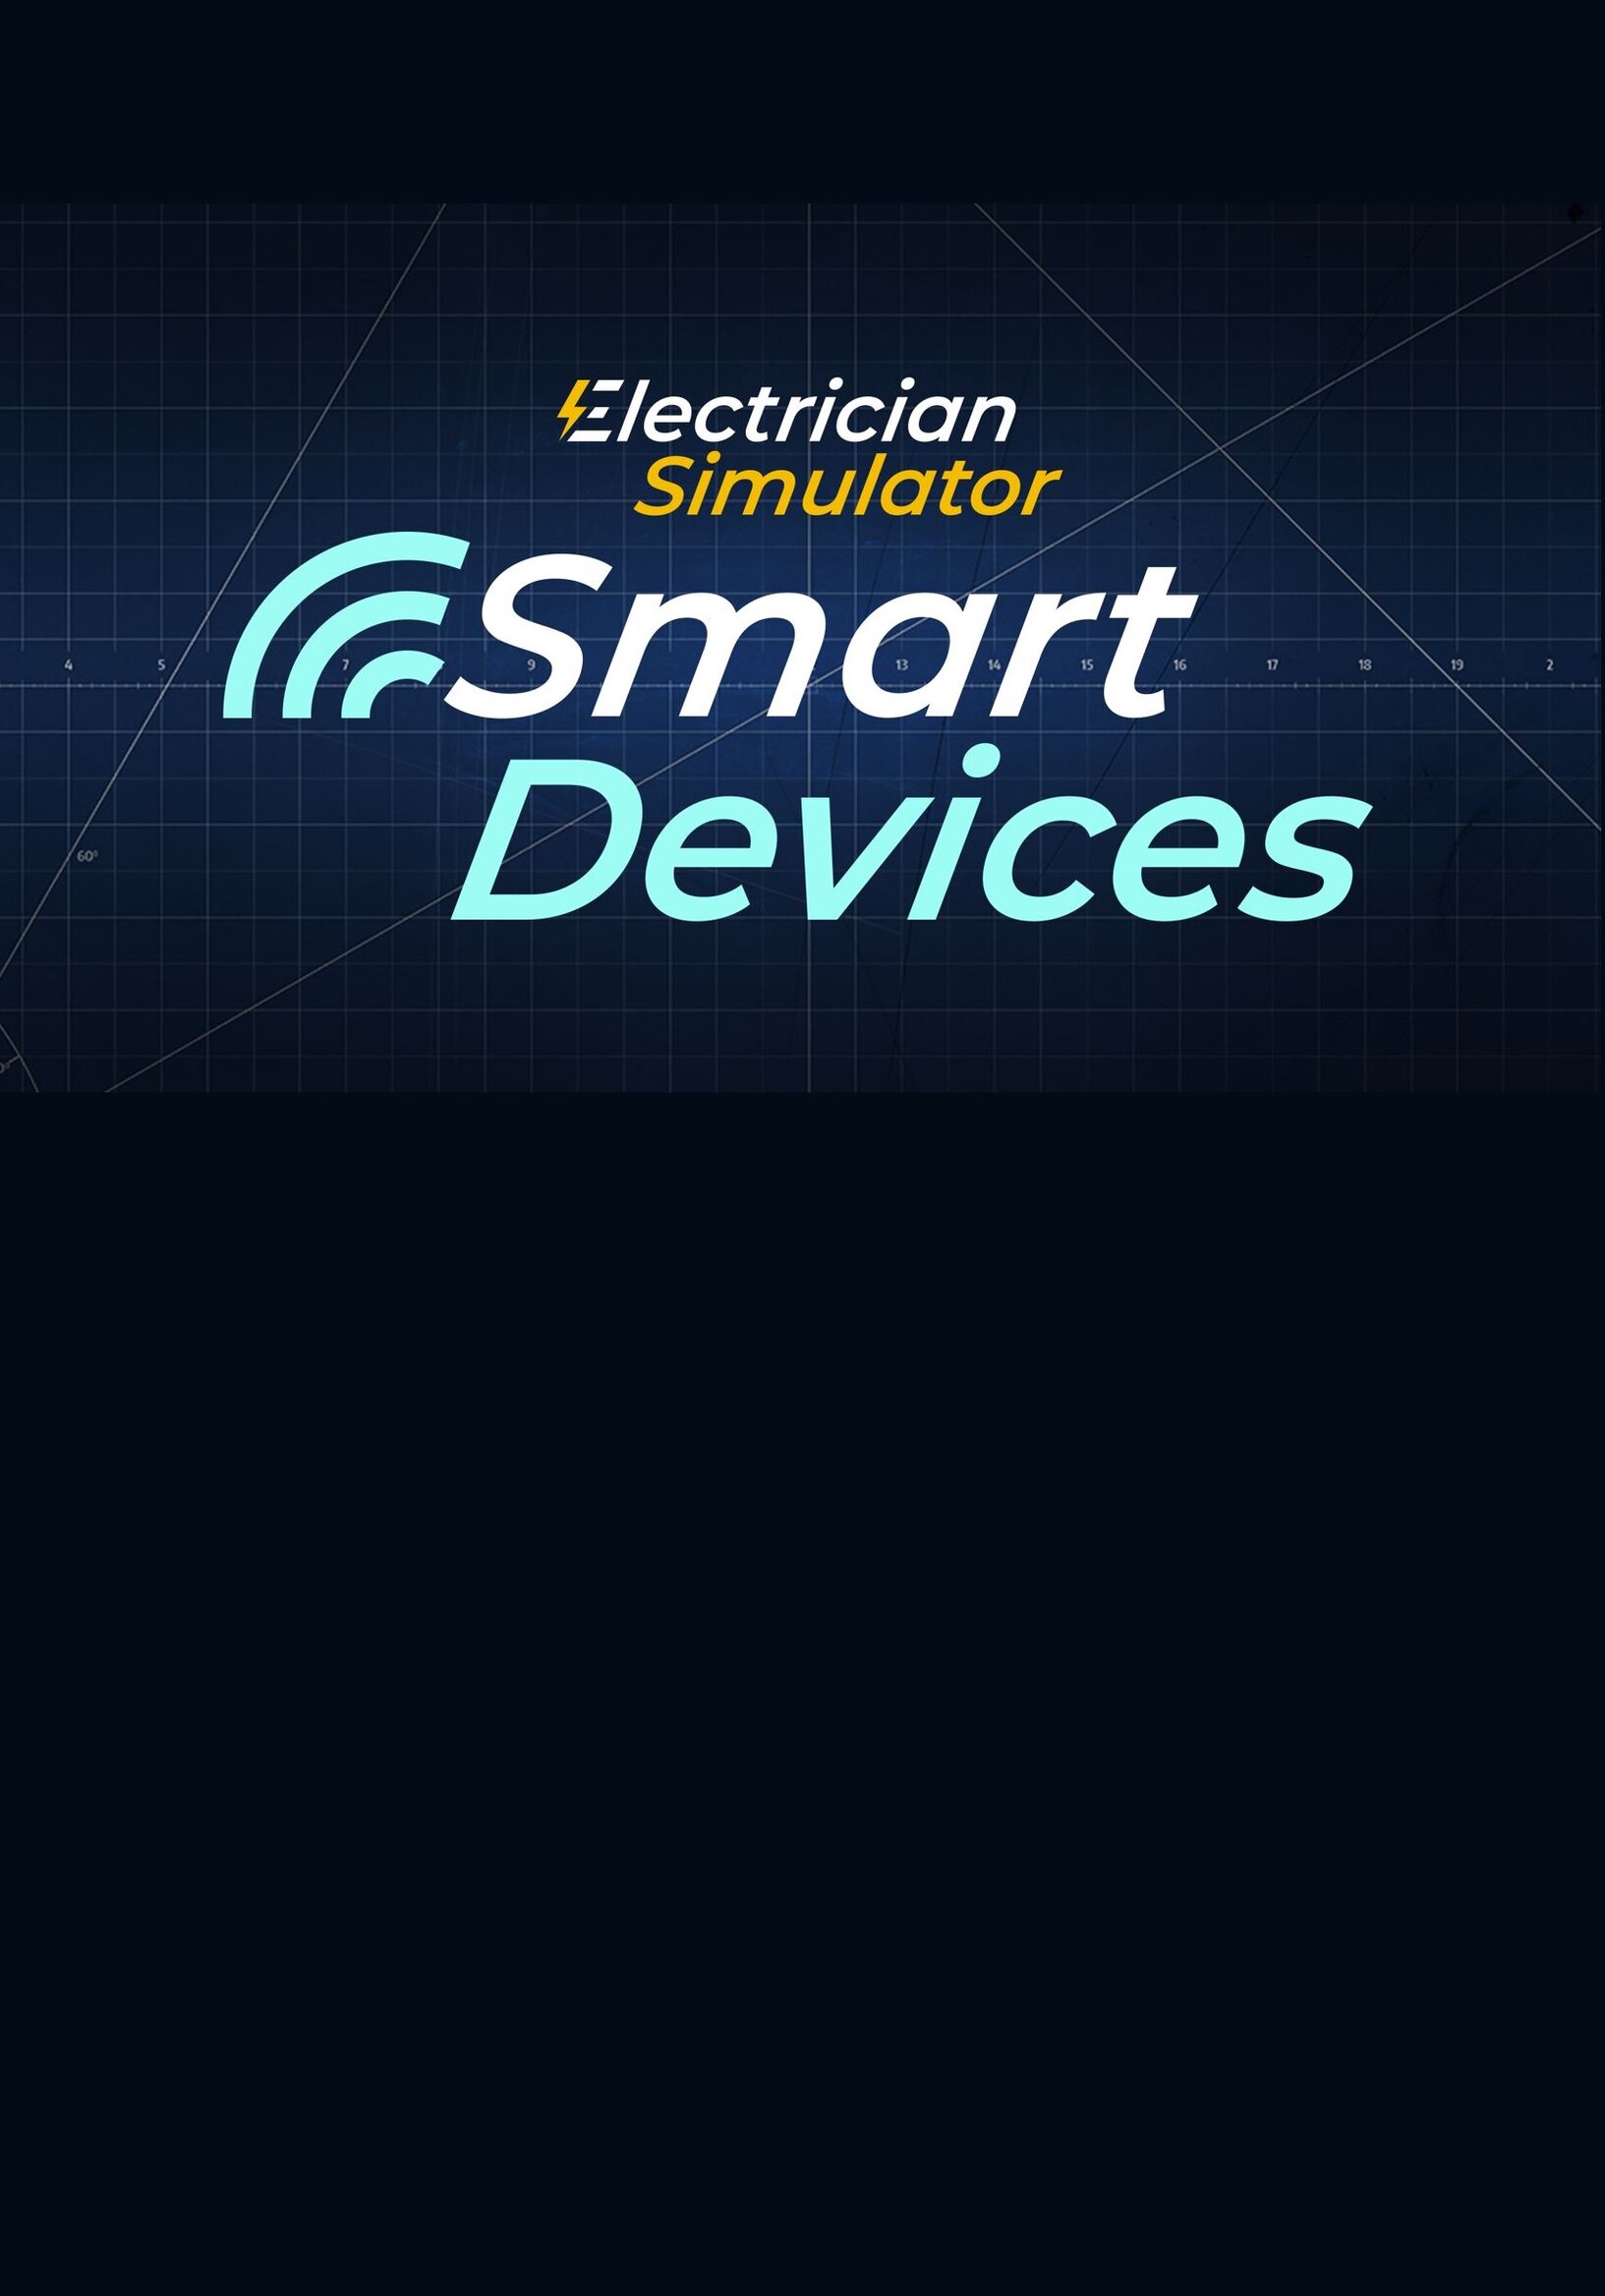 https://wirtus.pl/images/detailed/14/electrician-simulator-smart-devices.JPG